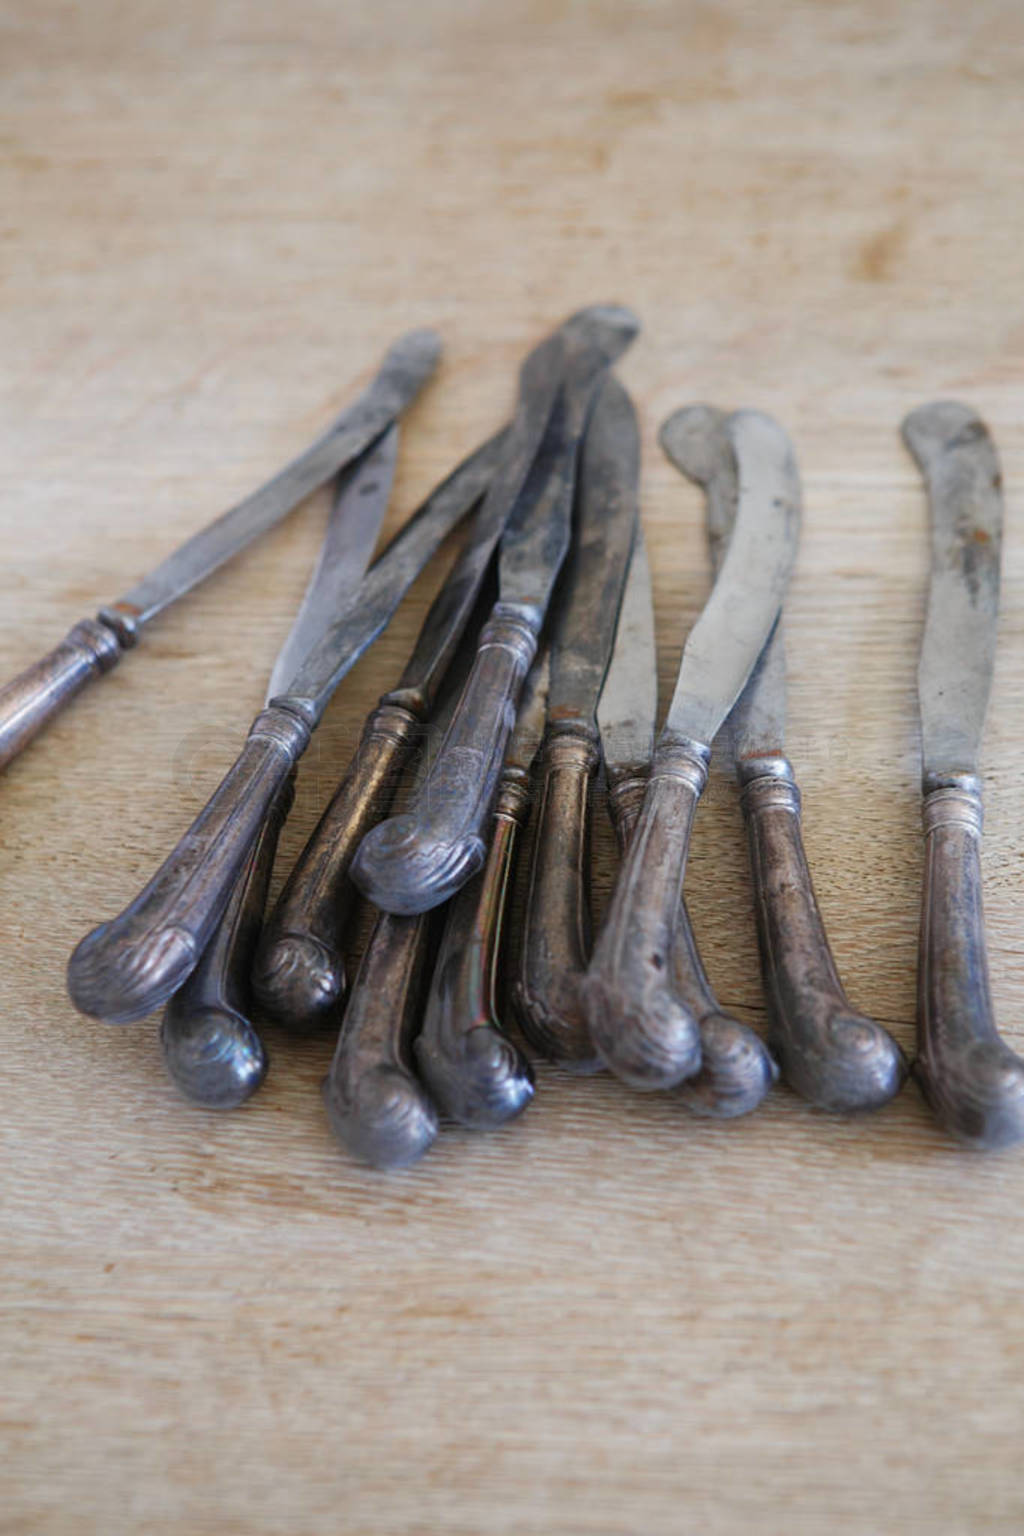 set of old table knives.